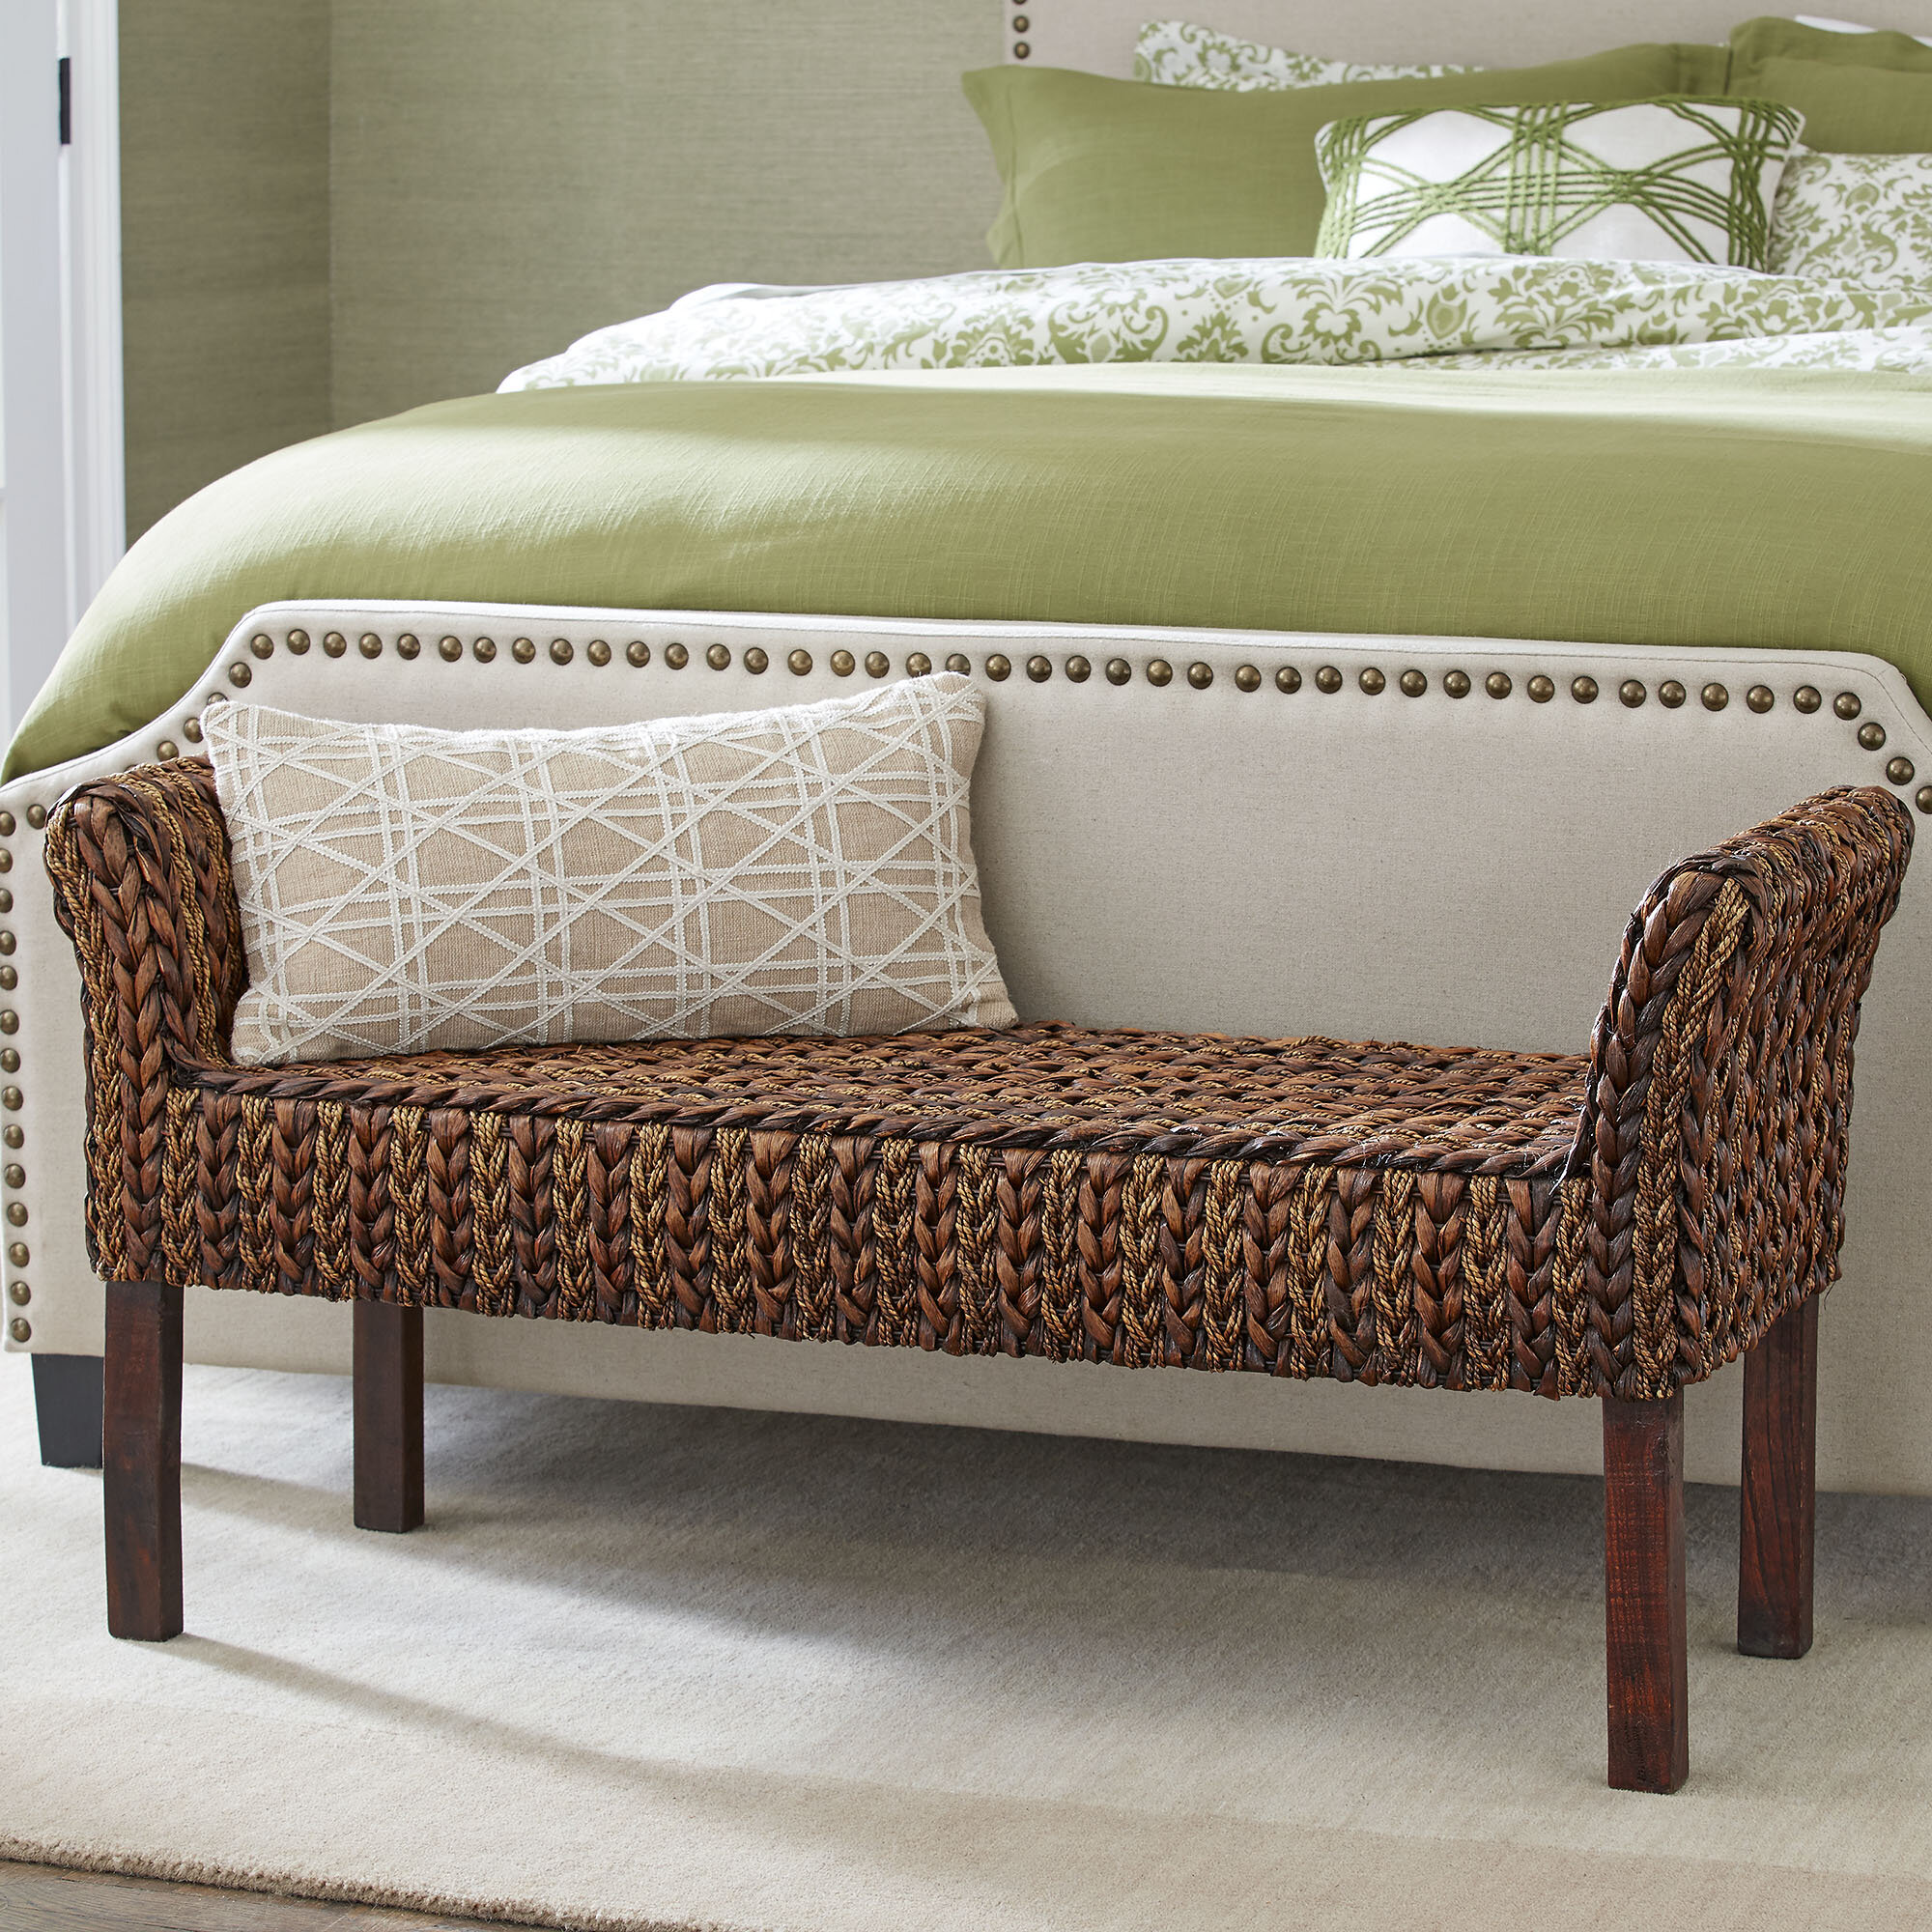 wicker bench with cushion